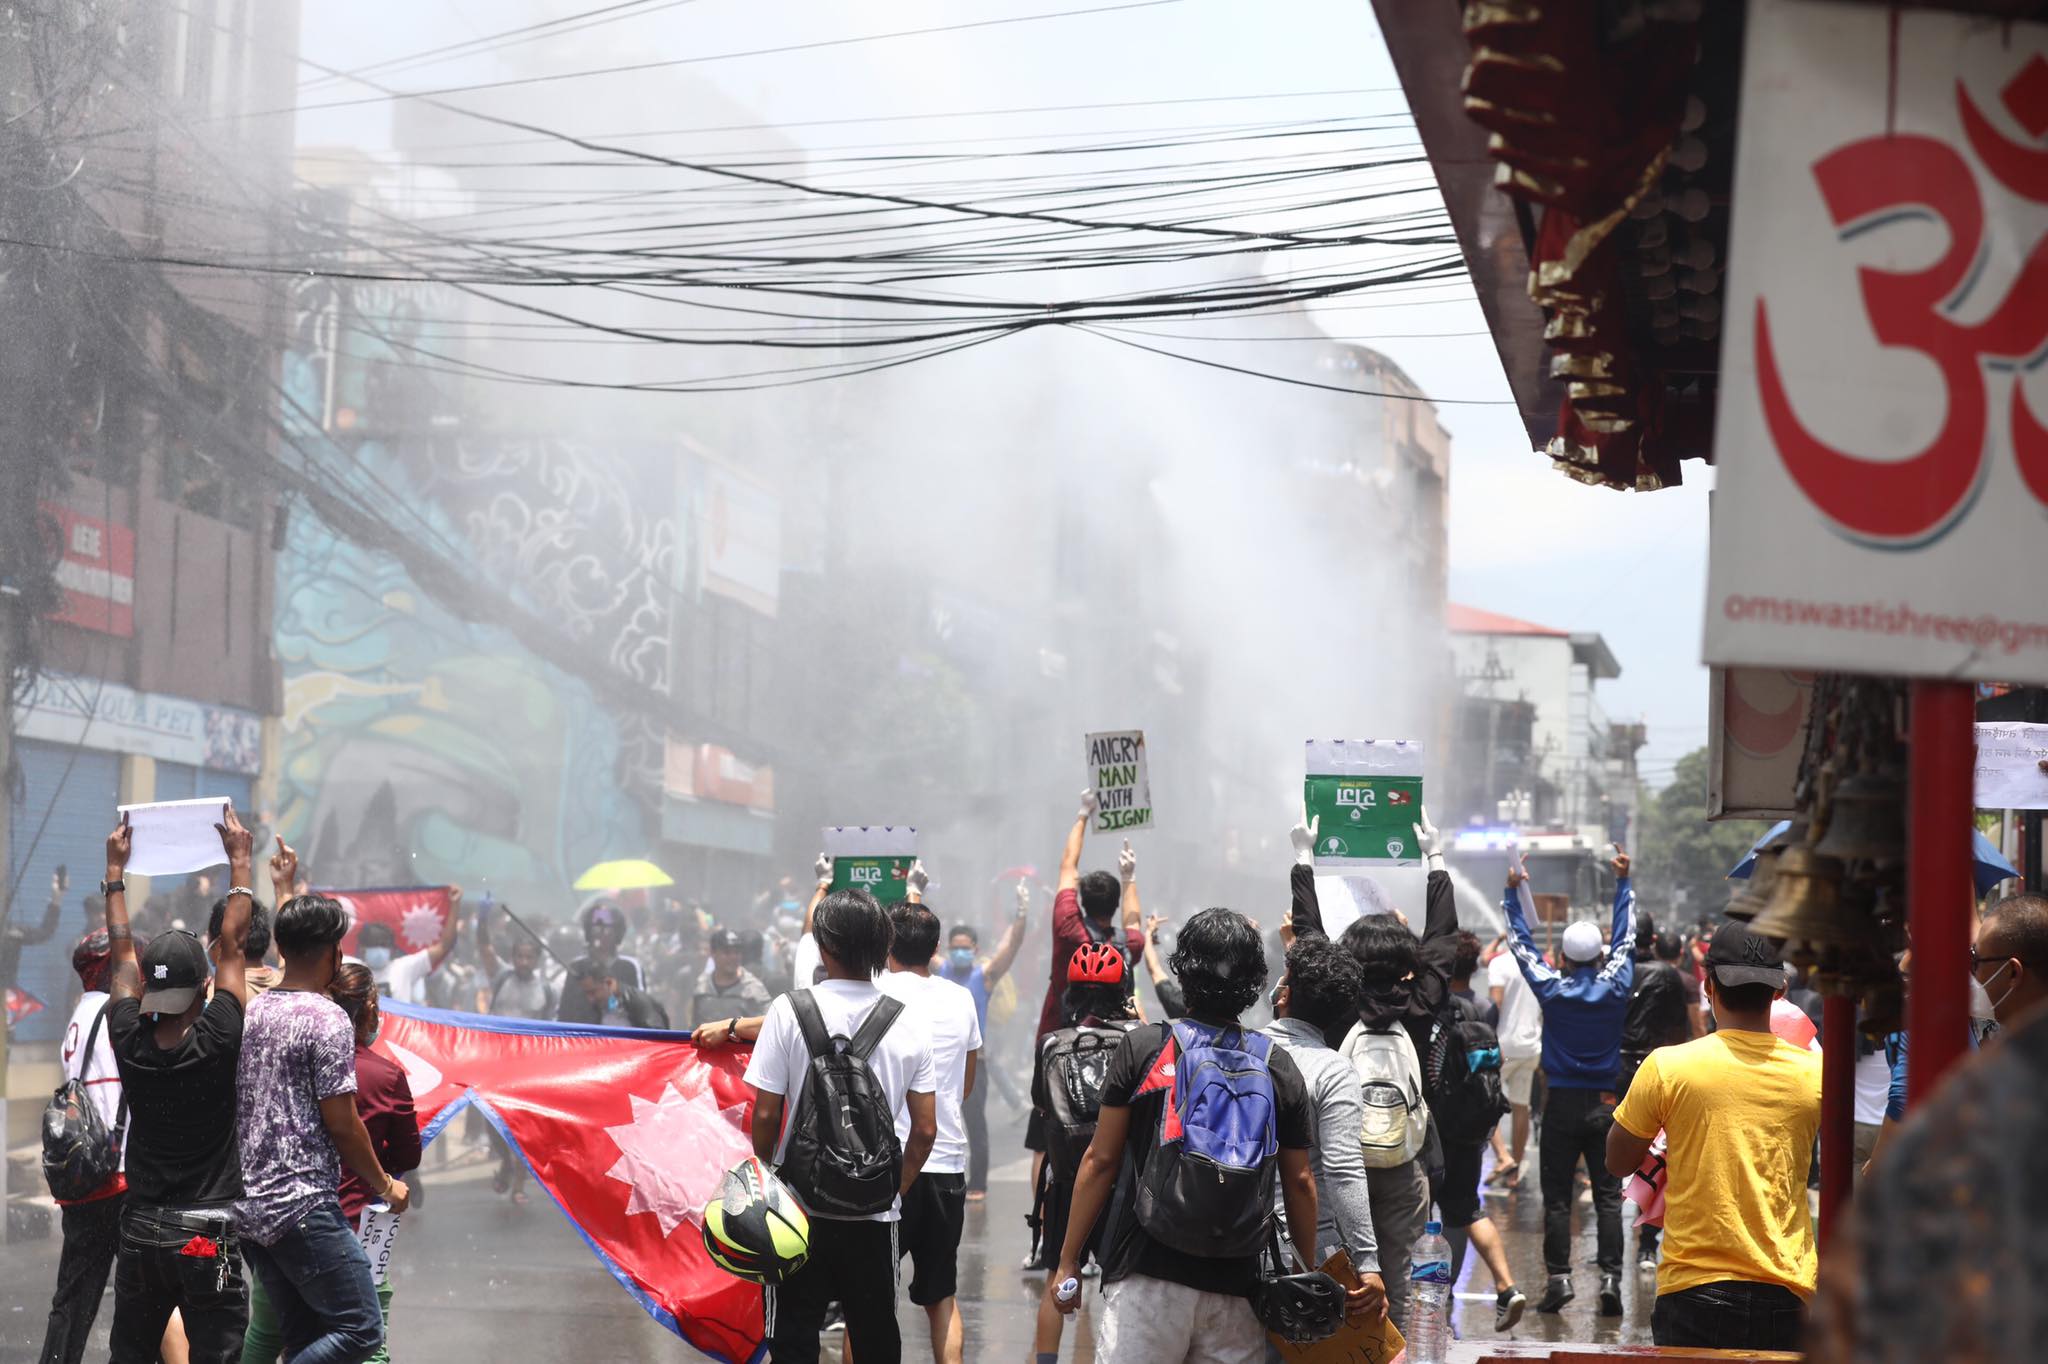 Police Use Teargas Water Cannons To Disperse Protesters